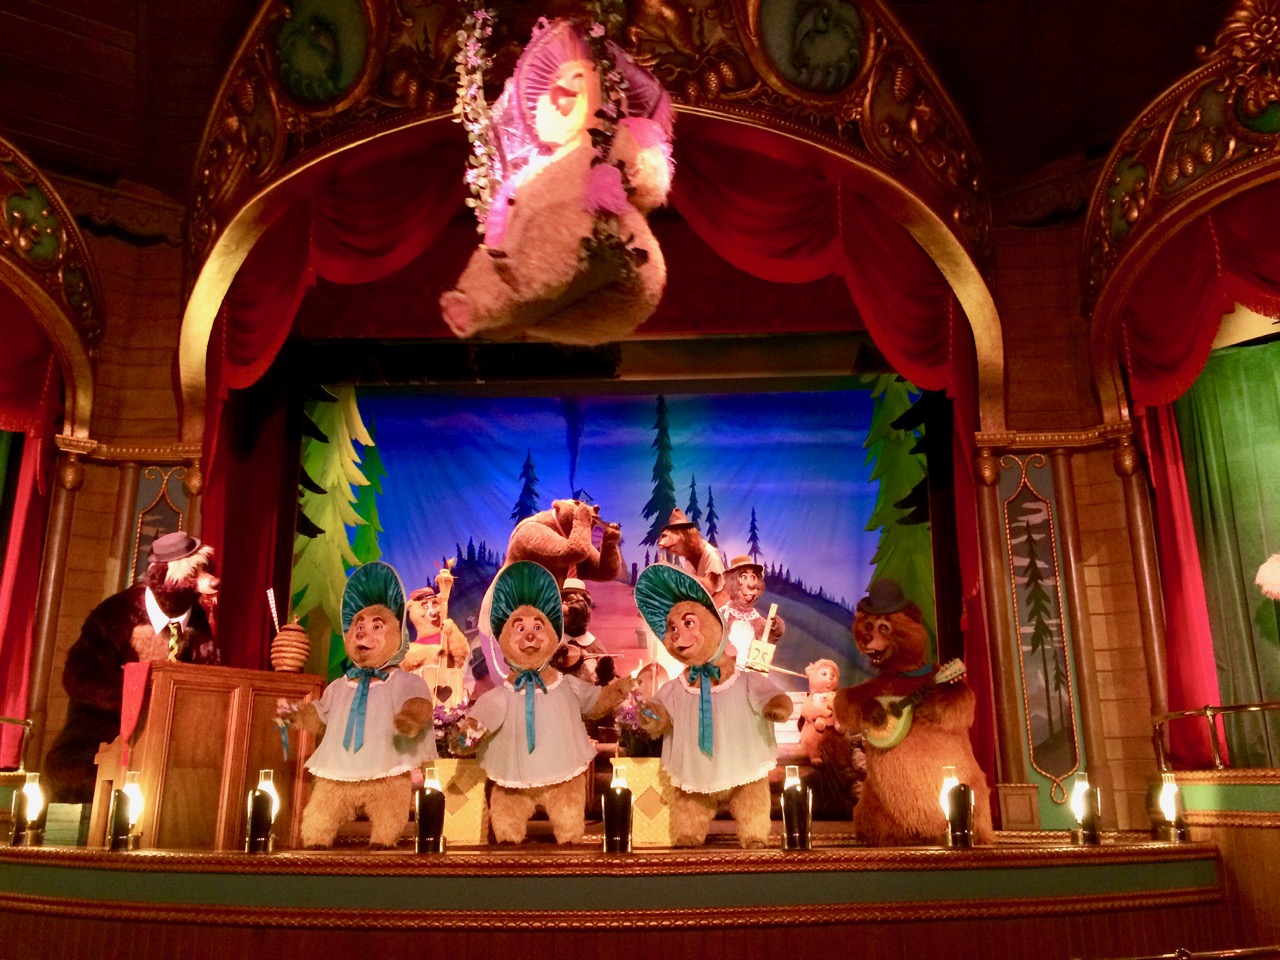 Is Country Bear Jamboree in Jeopardy?